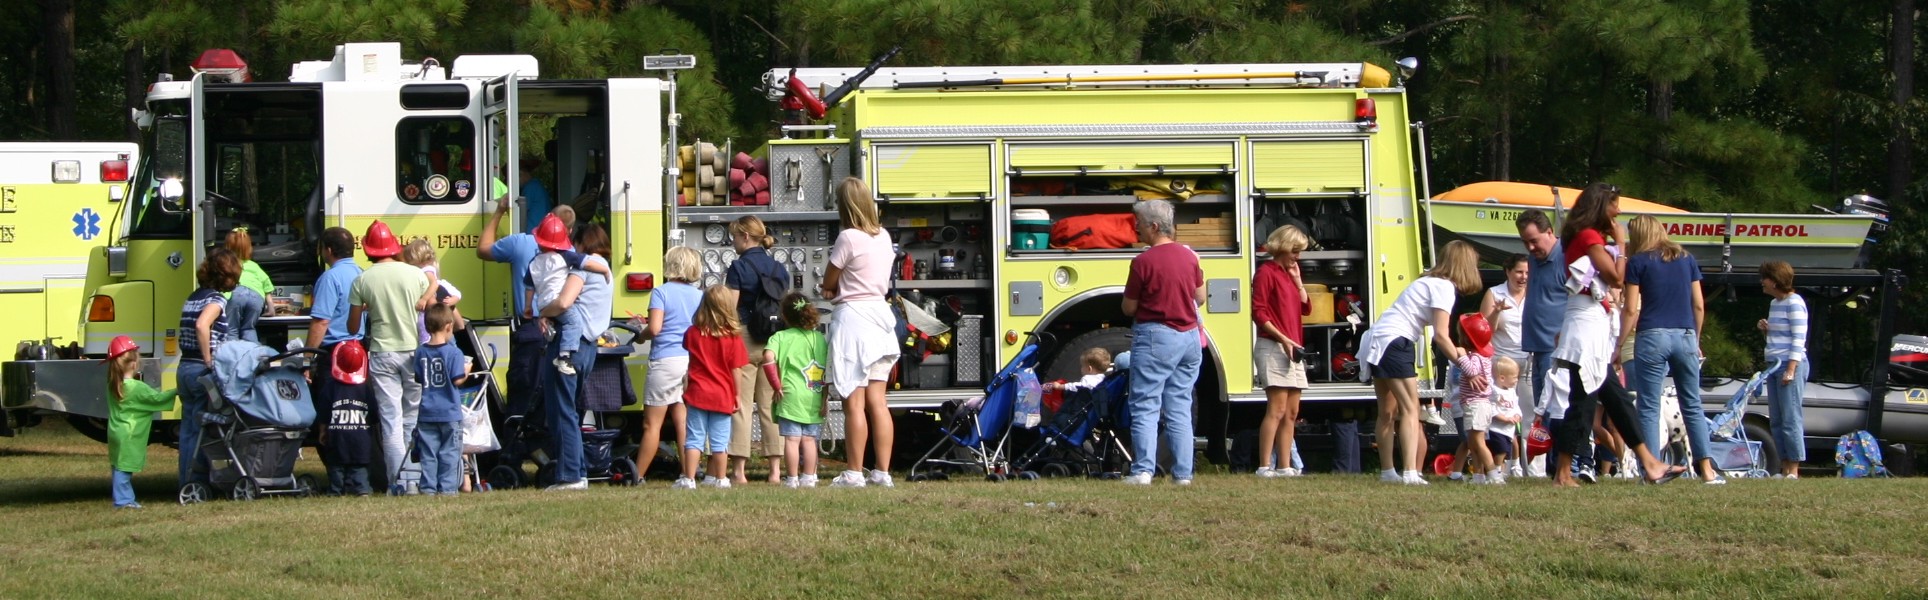 Fire Truck with crowd